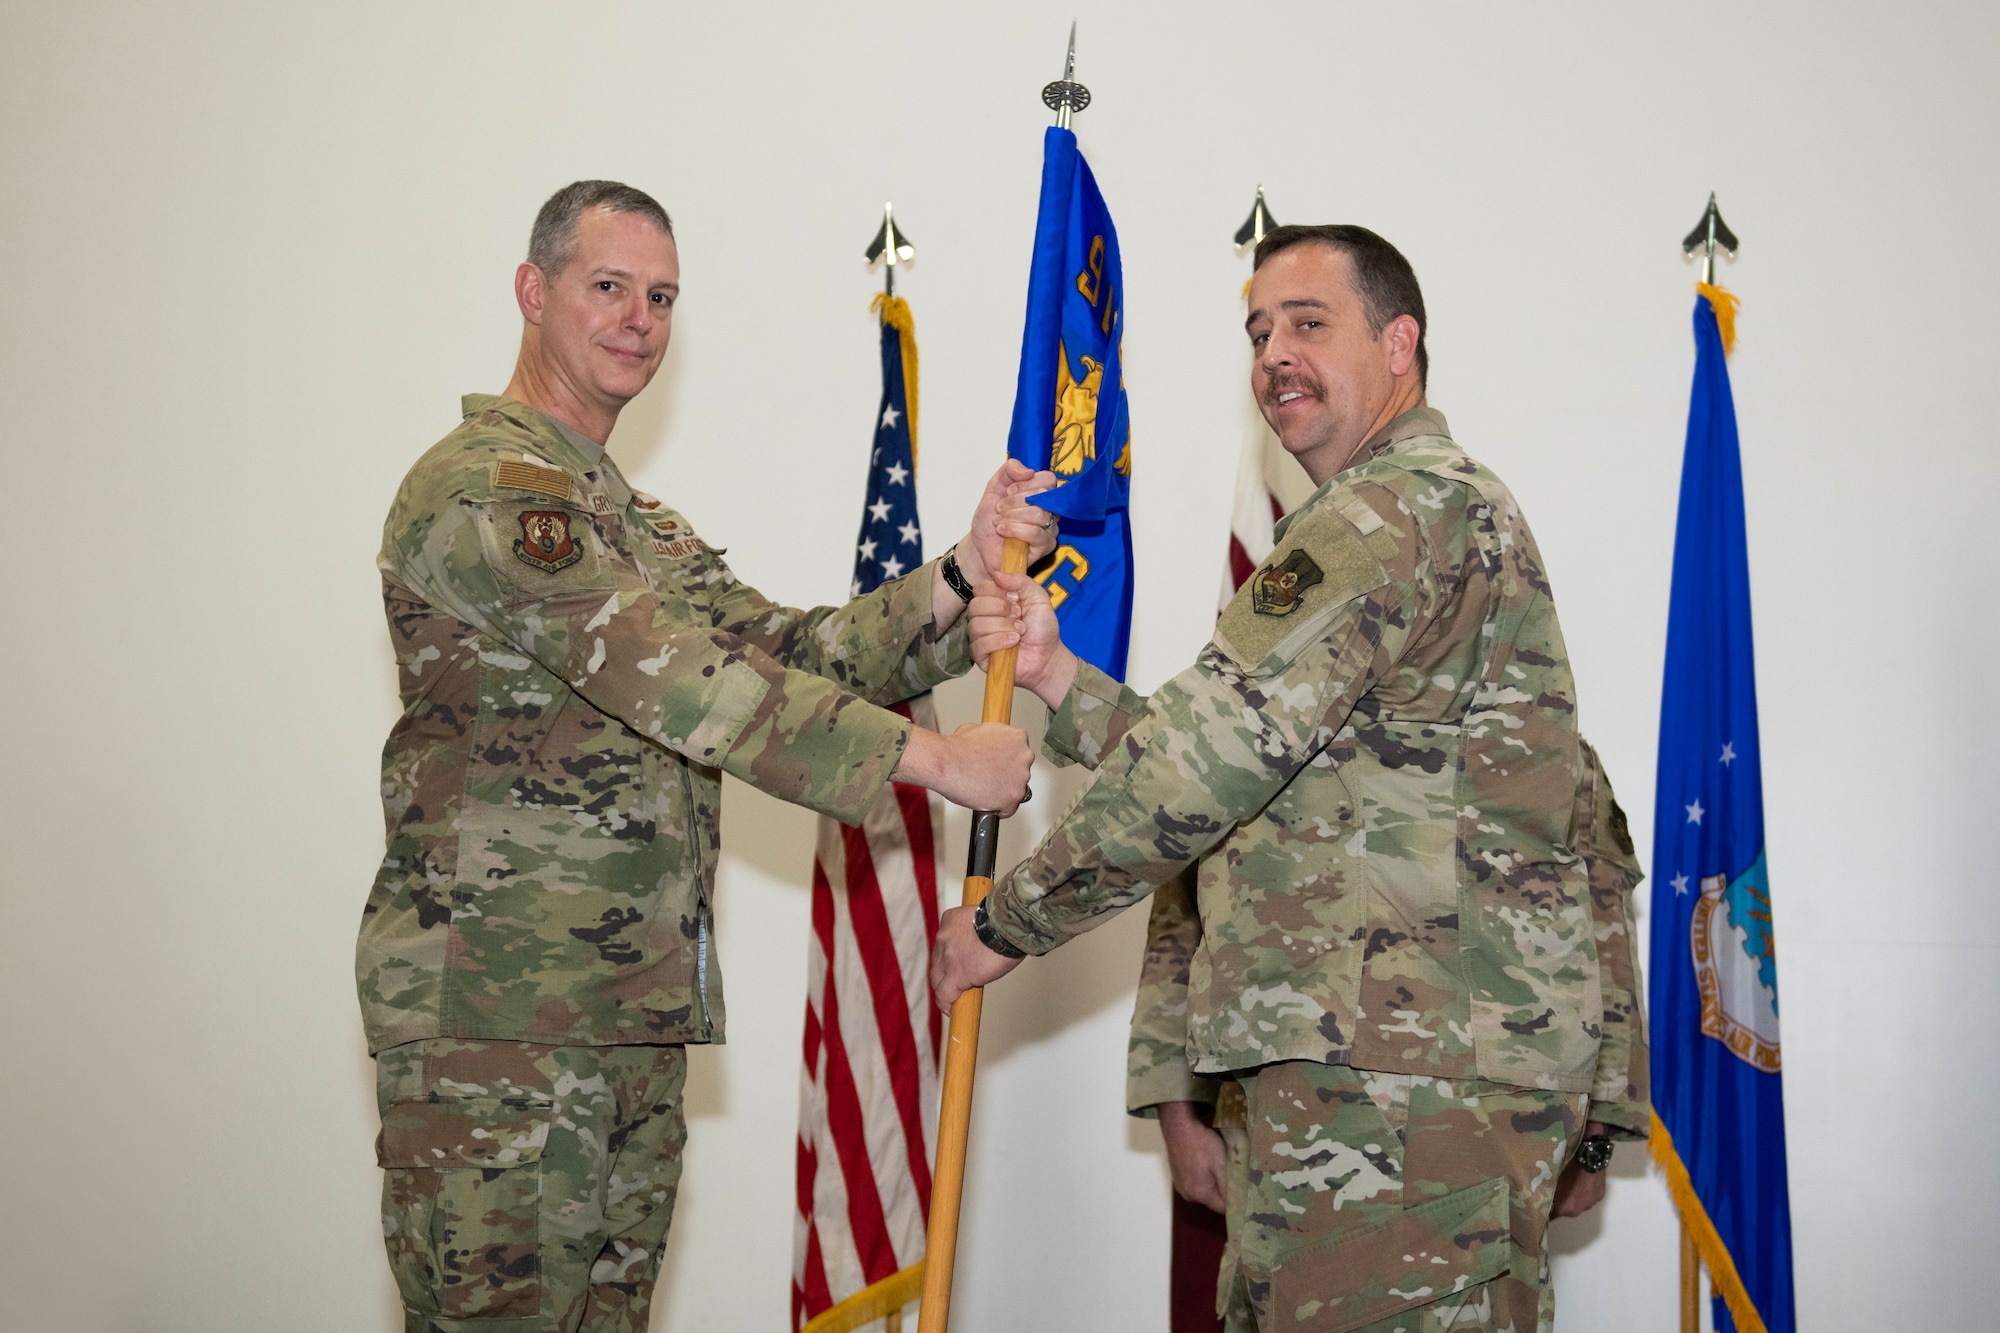 U.S. Air Force Col. Glenn Cameron, right, 9th Air Force (Air Forces Central) 1st Expeditionary Theater Support Group (ETSG) incoming commander, assumes command from U.S. Air Force Lt. Gen. Alexus Grynkewich, Ninth Air Force (Air Forces Central) commander and Combined Forces Air Component Commander for U.S. Central Command, left, during the ETSG activation and change of command ceremony July 3, 2023, at Al Udeid Air Base, Qatar. Since its inception in March, the ETSG has successfully conducted missions across 12 different bases in eight countries. The group consists of multi-capable Airmen with expertise from engineering, logistics and communications to conduct more effective warfighting missions. (U.S. Air Force photo by Staff Sgt. Jennifer Zima)